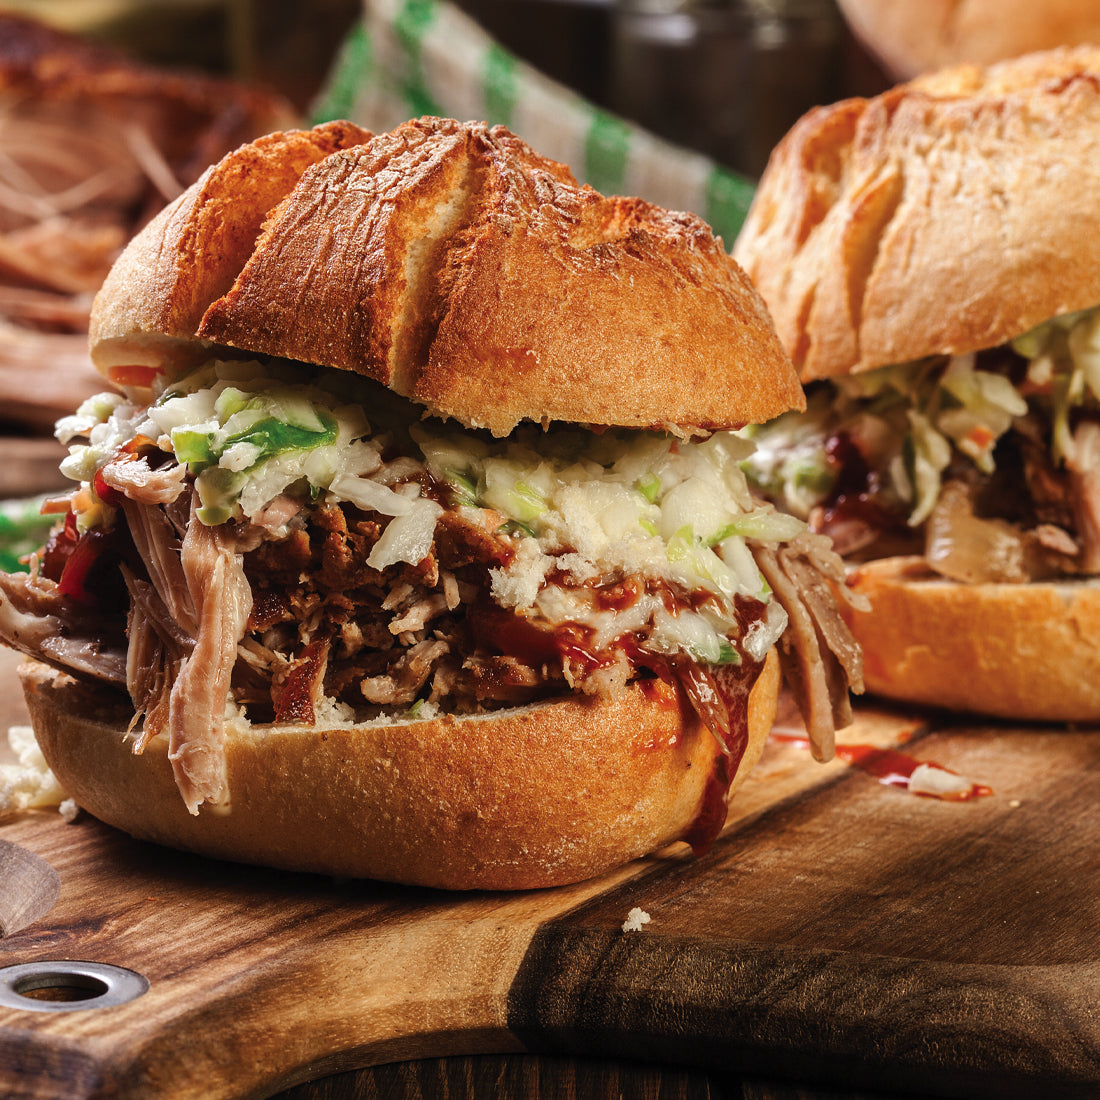 A pulled pork sandwich with barbeque sauce on a wood cutting board